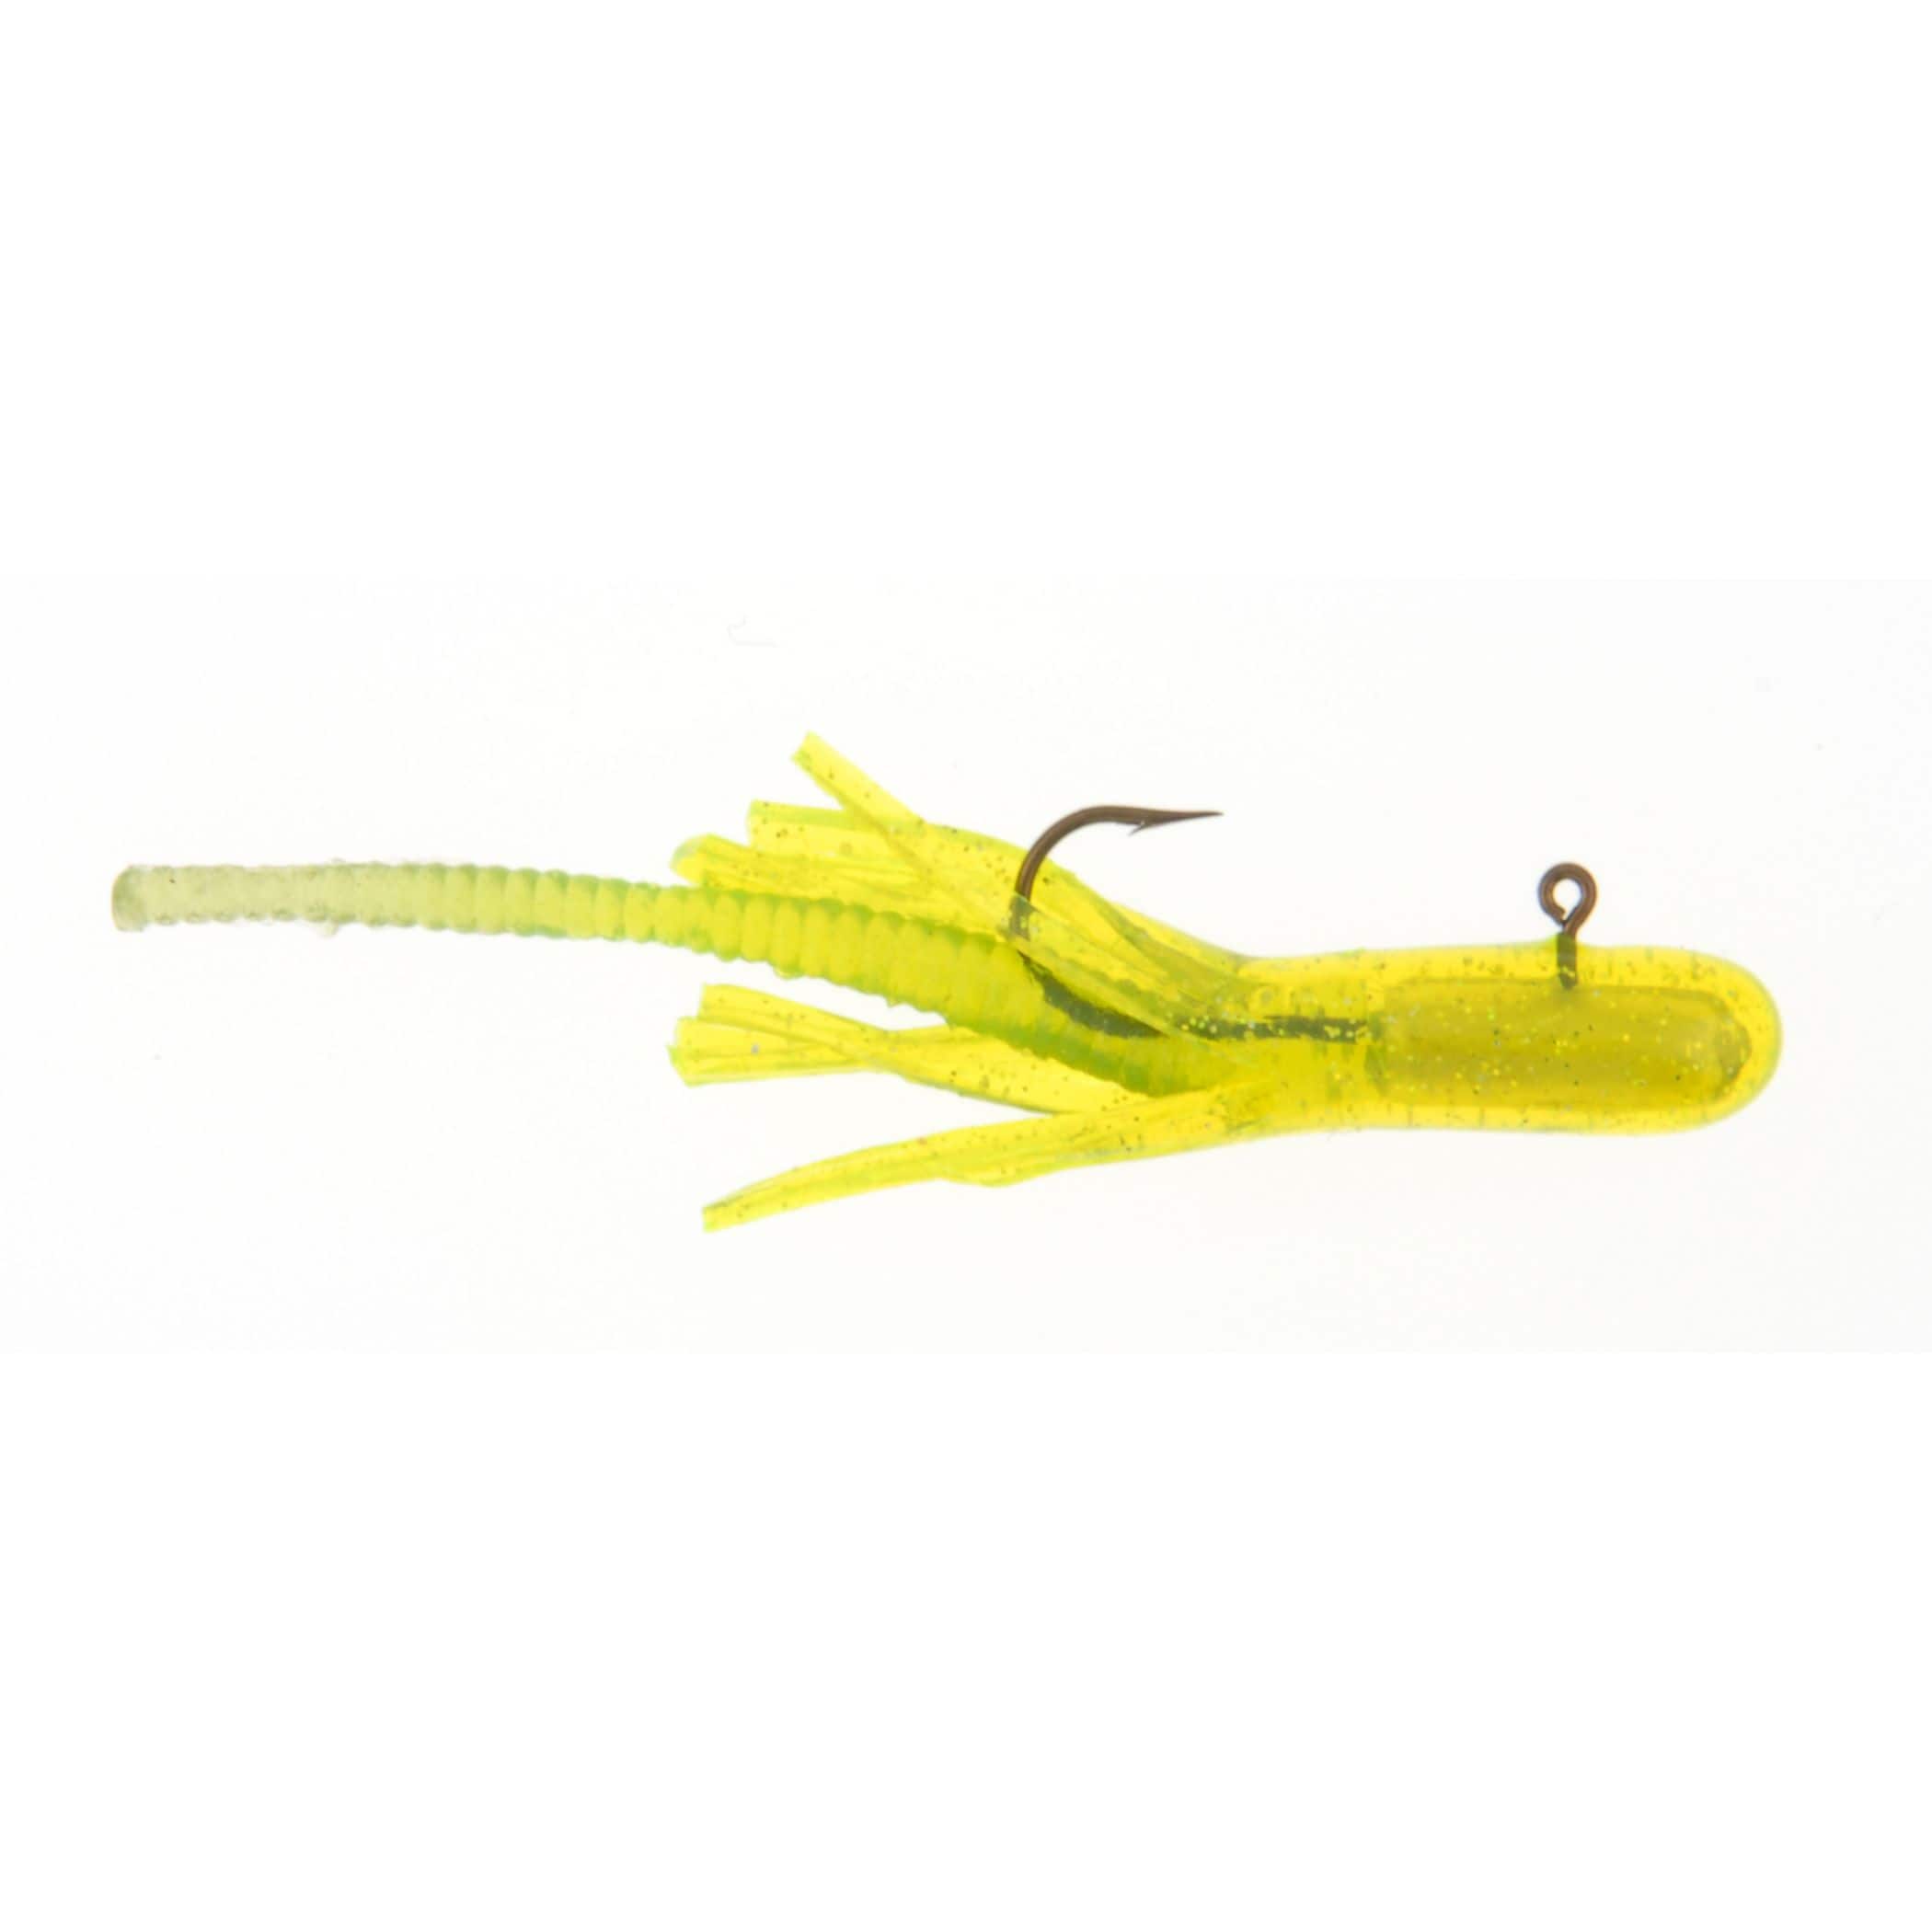 Big Bite Baits 1.5 Crappie Tube (32) Red/Chartreuse Sparkle